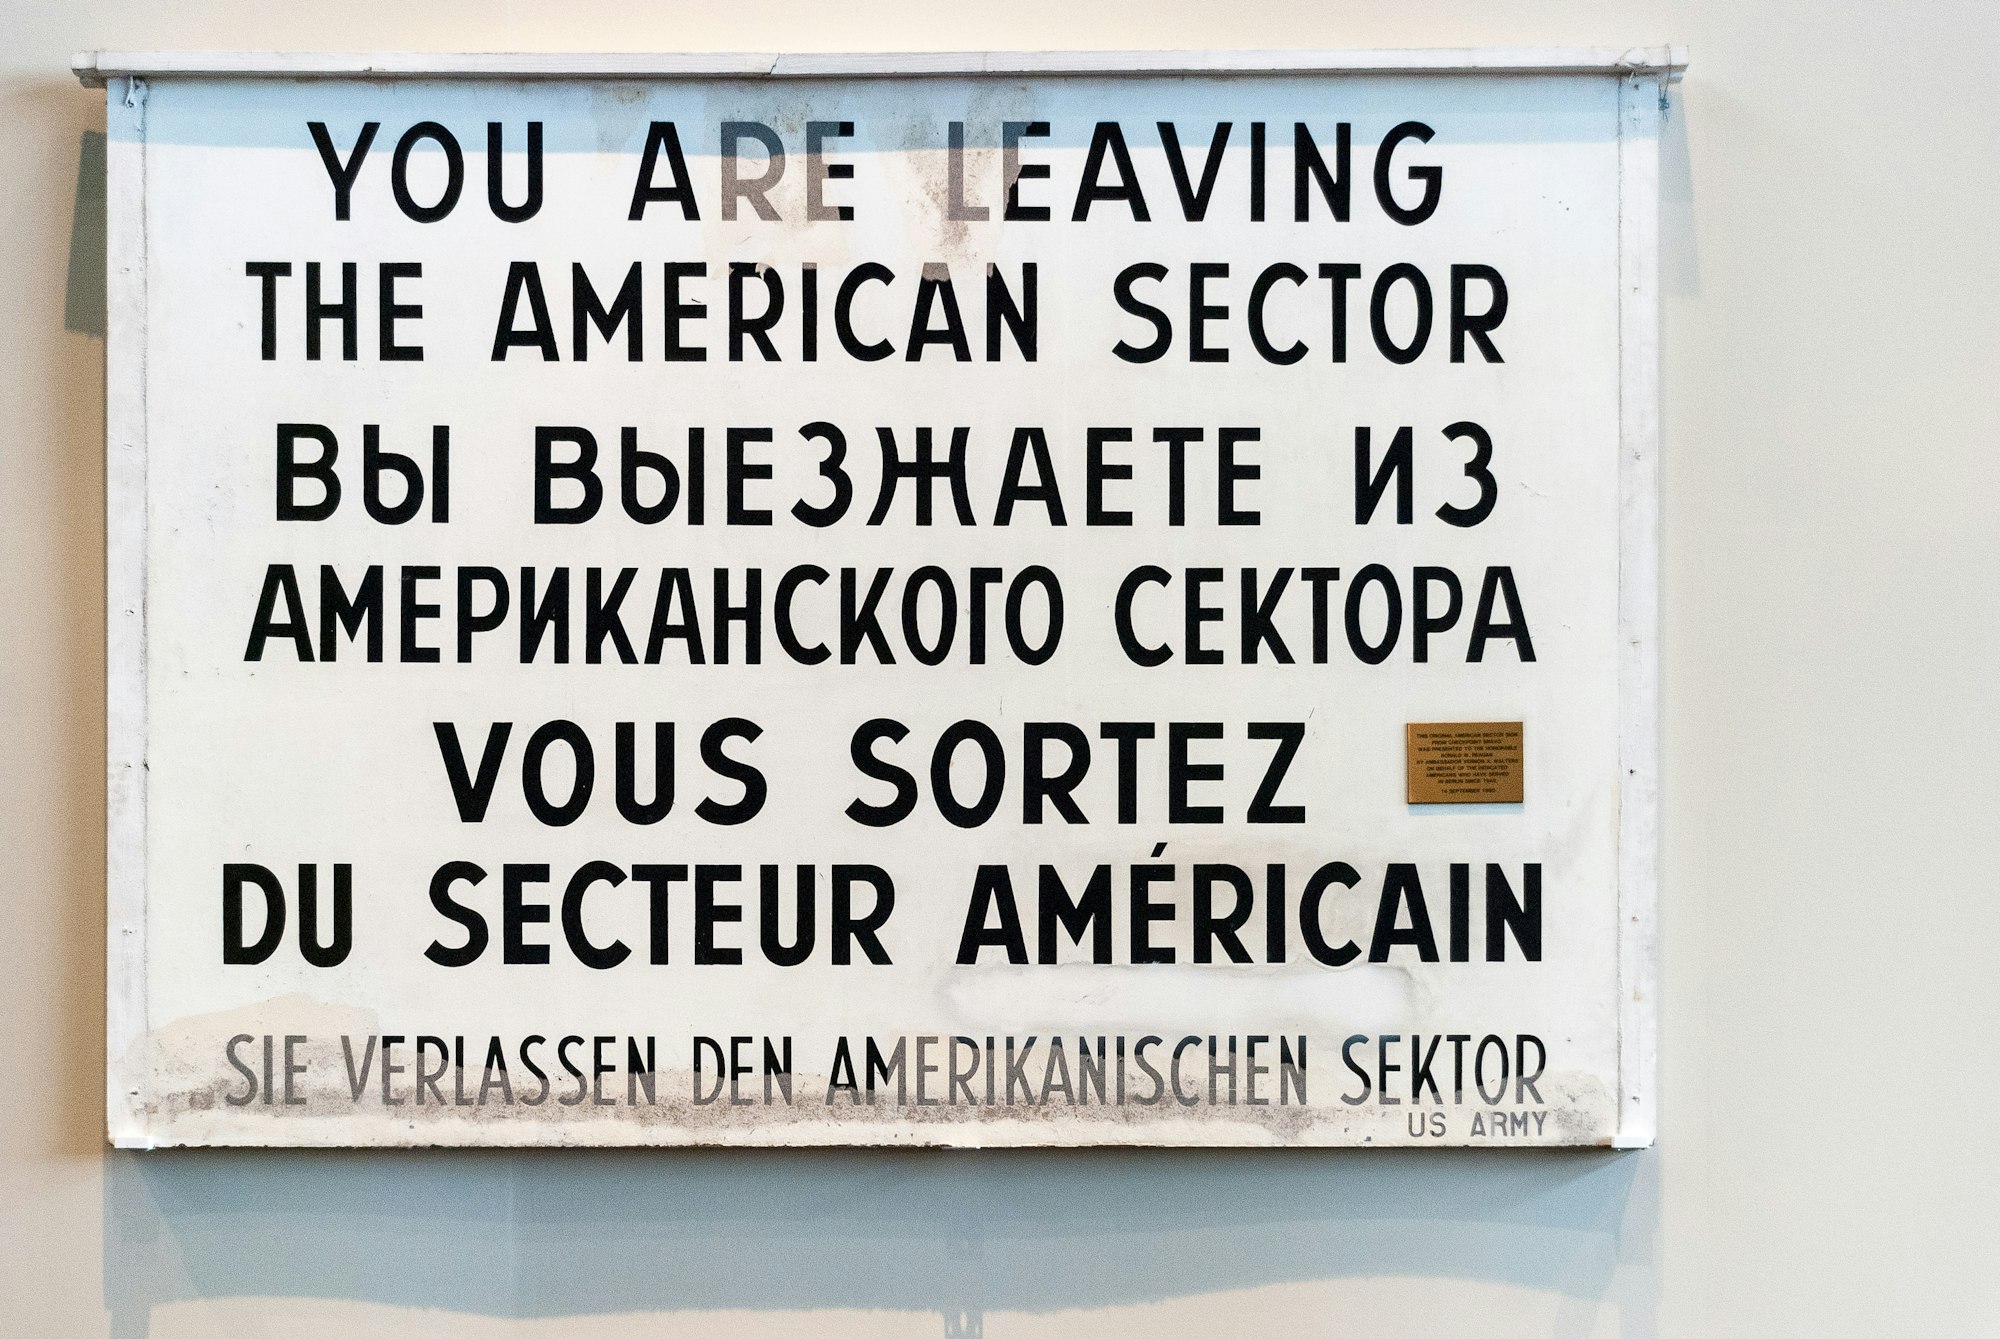 »You are leaving the american sector«. Berlin sign at Checkpoint Charlie before the fall of the wall in 1989.